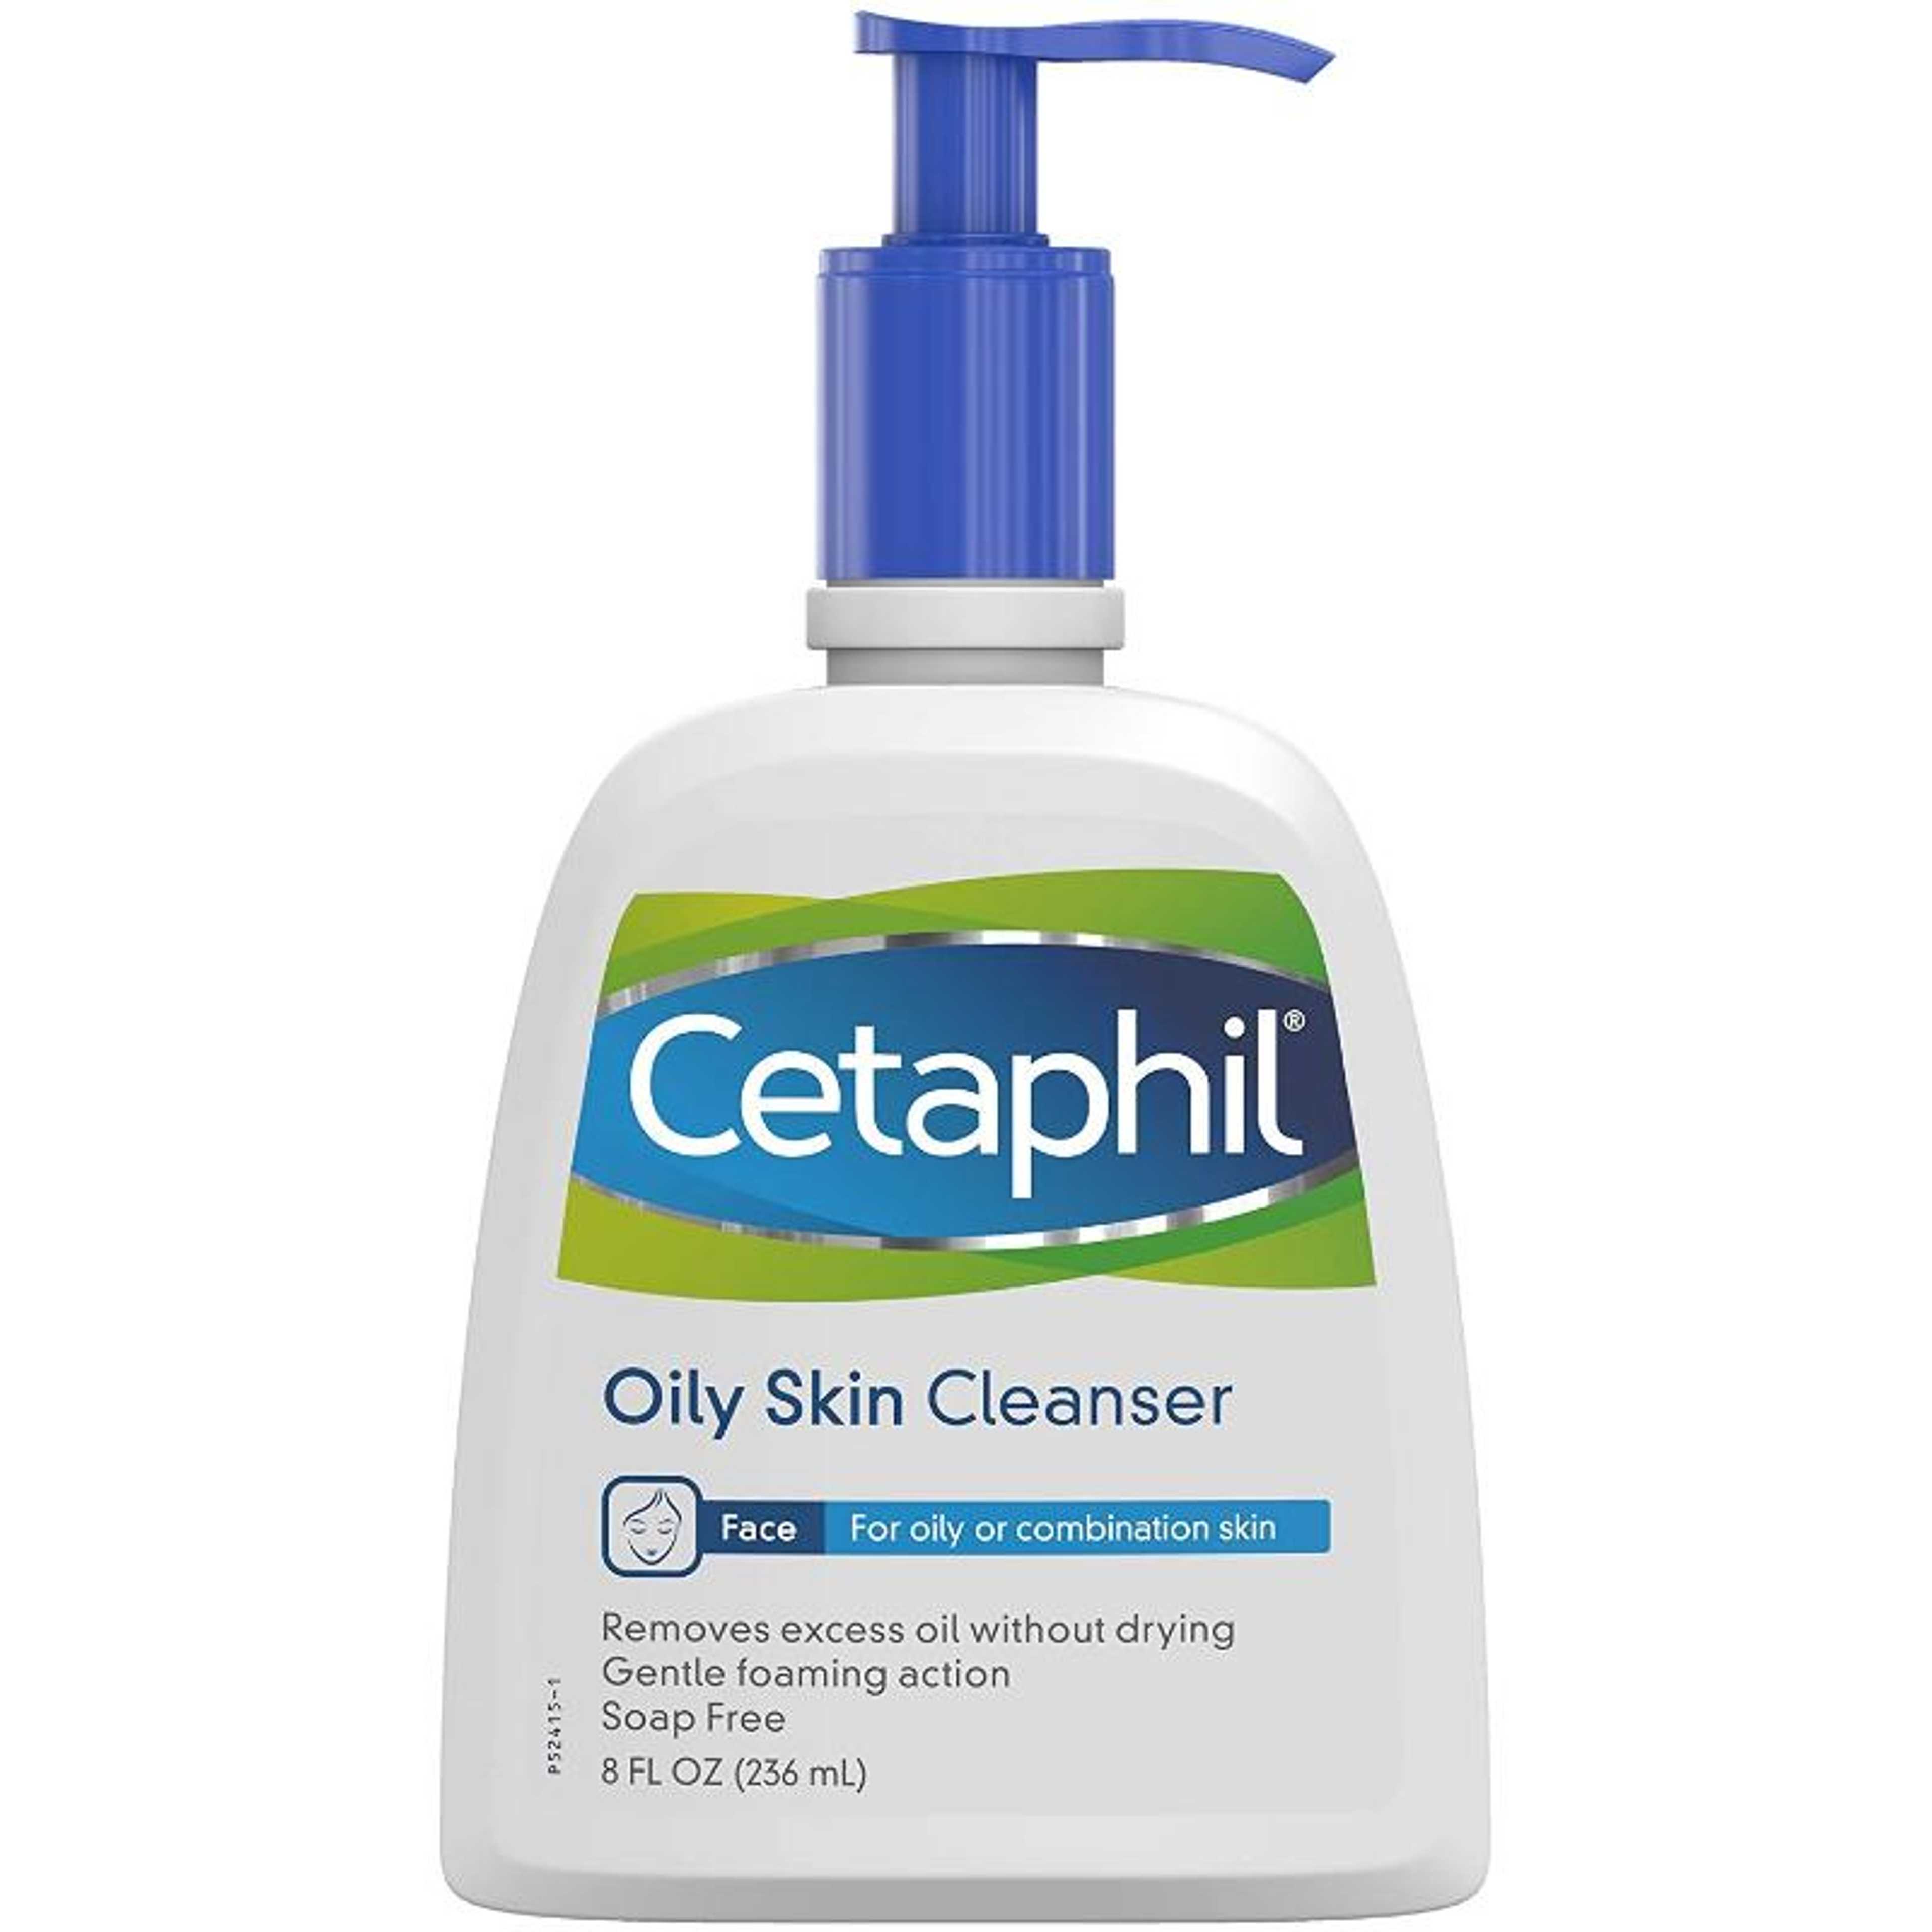 Cetaphil Oily Skin Cleanser 236ml For Oily & Combination Skin , Original Made in UK